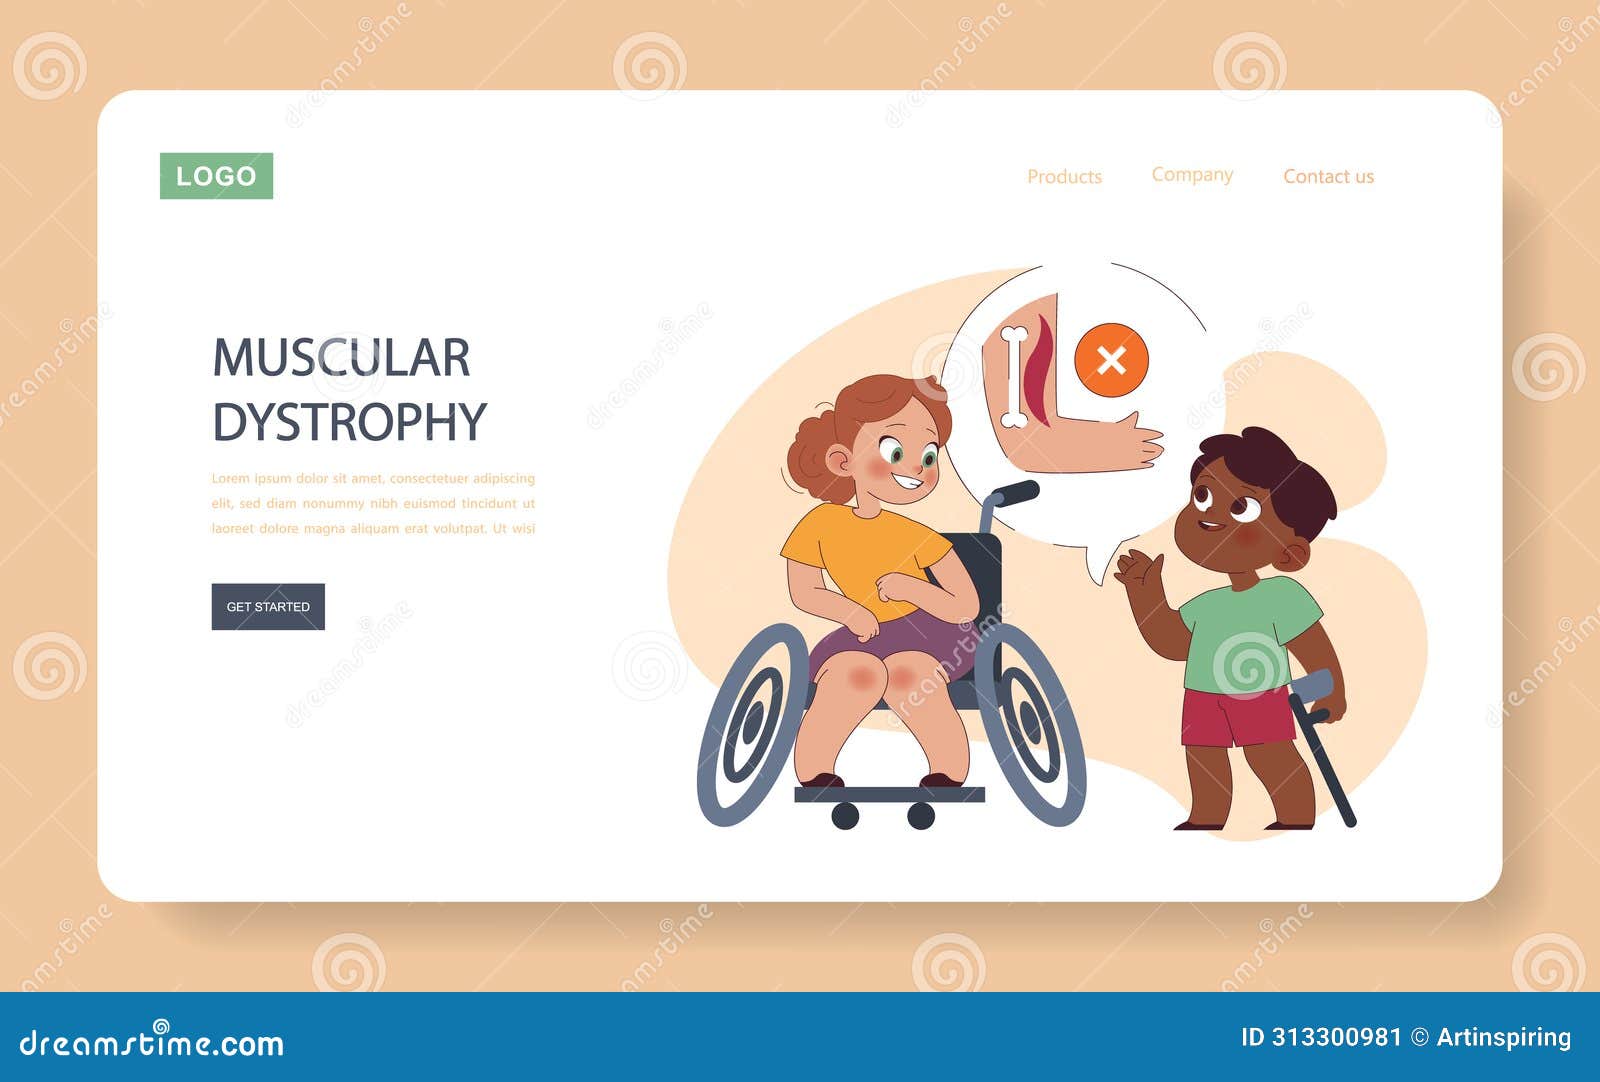 muscular dystrophy concept.